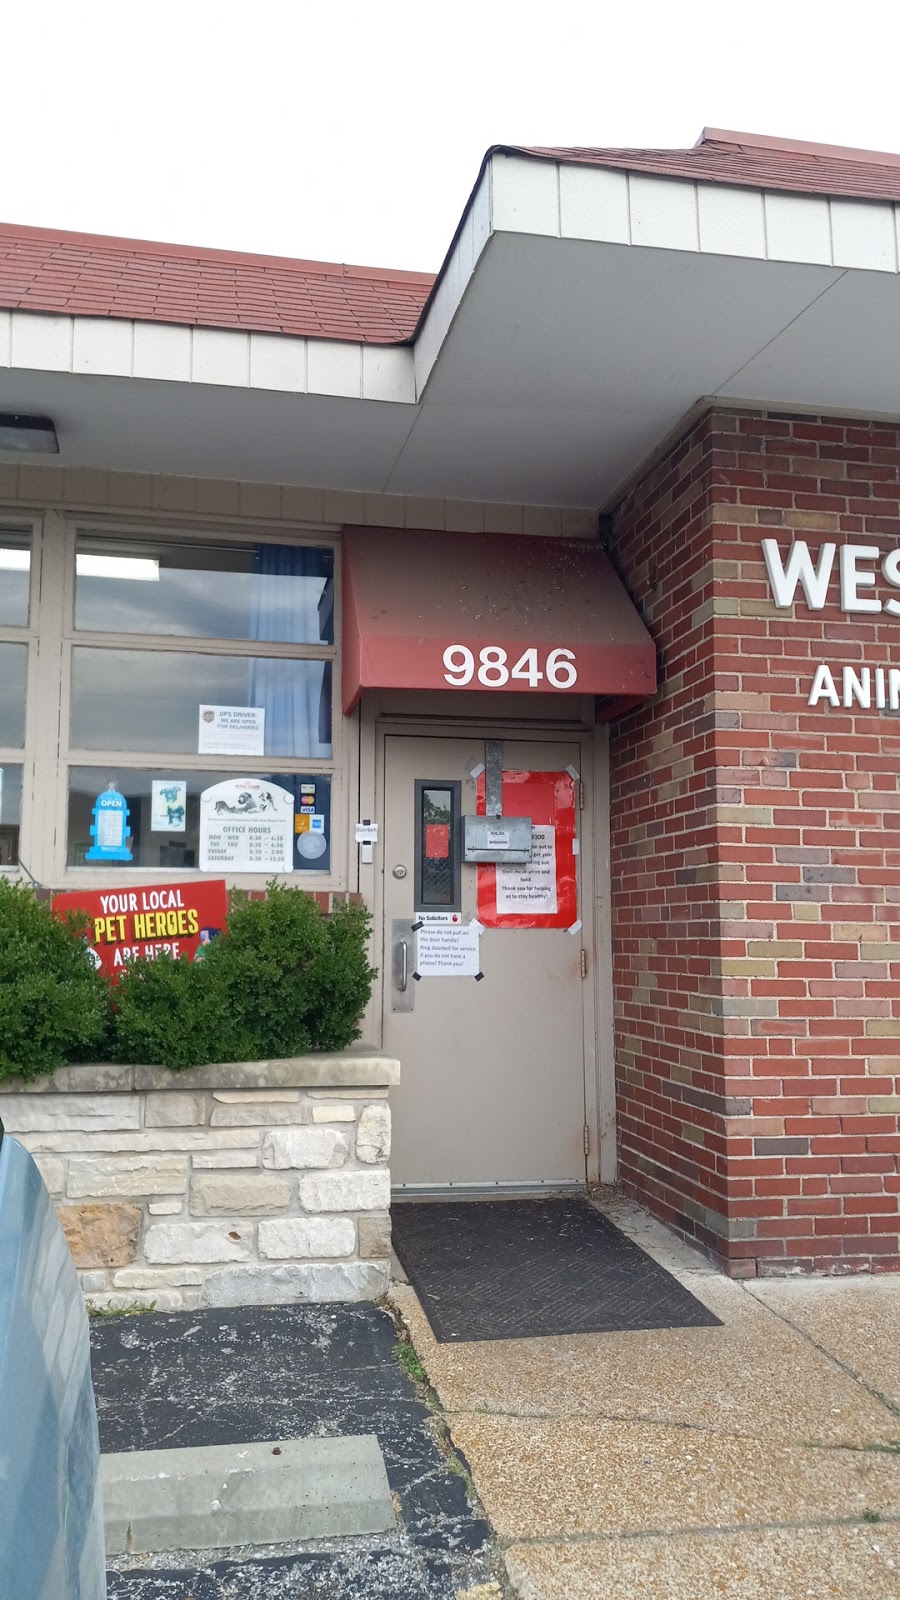 West Side Animal Clinic | 9846 Manchester Rd, St. Louis, MO 63119, USA | Phone: (314) 962-9300